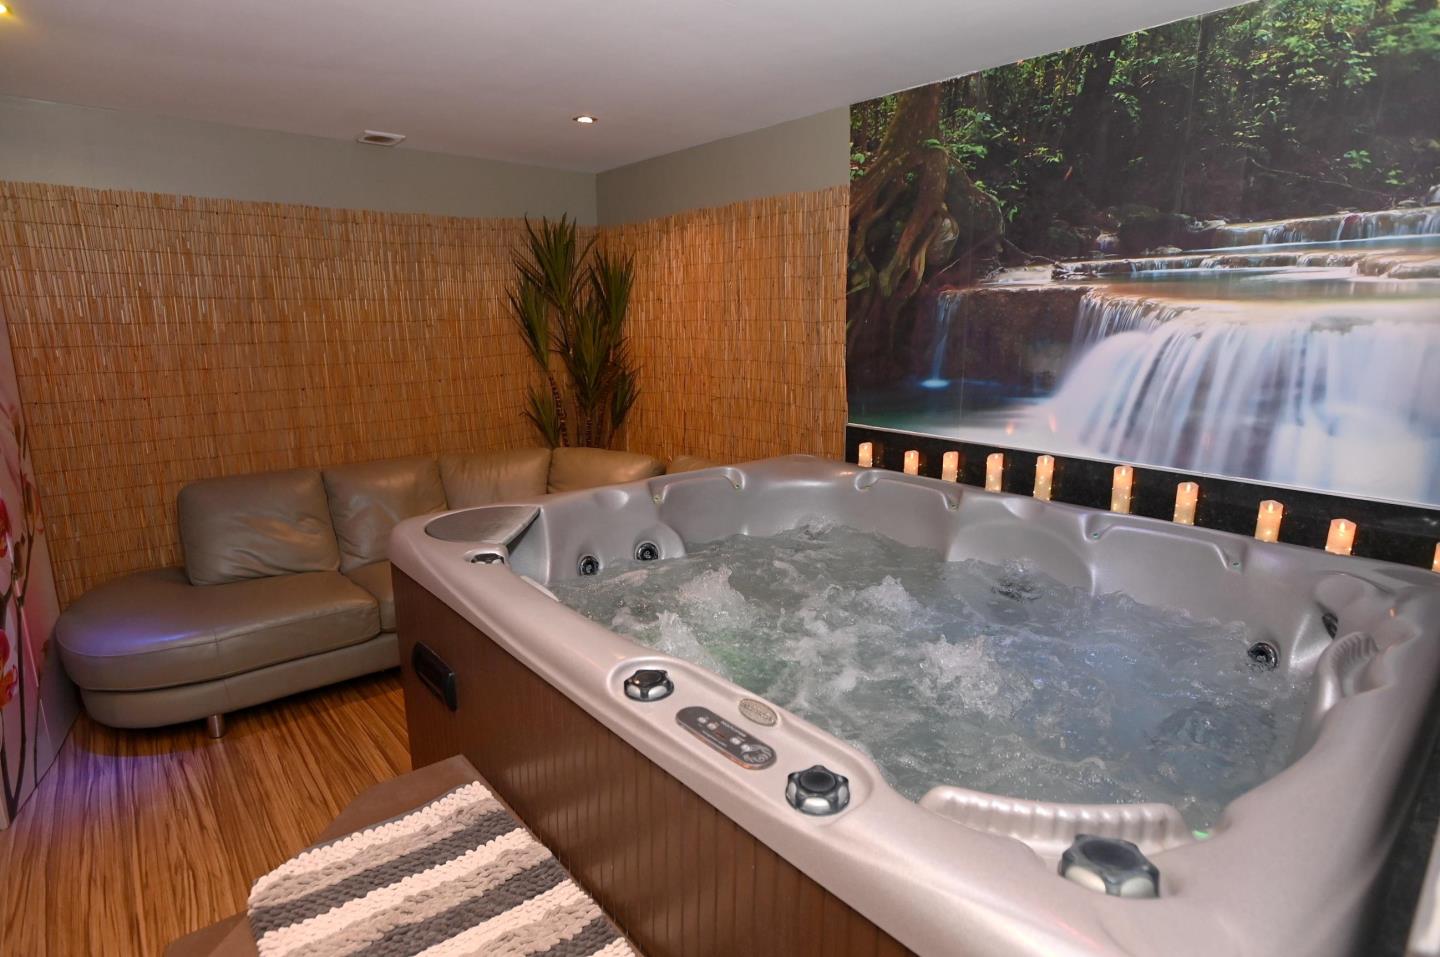 Take a look inside one of Aberdeen's newest and most tranquil spas